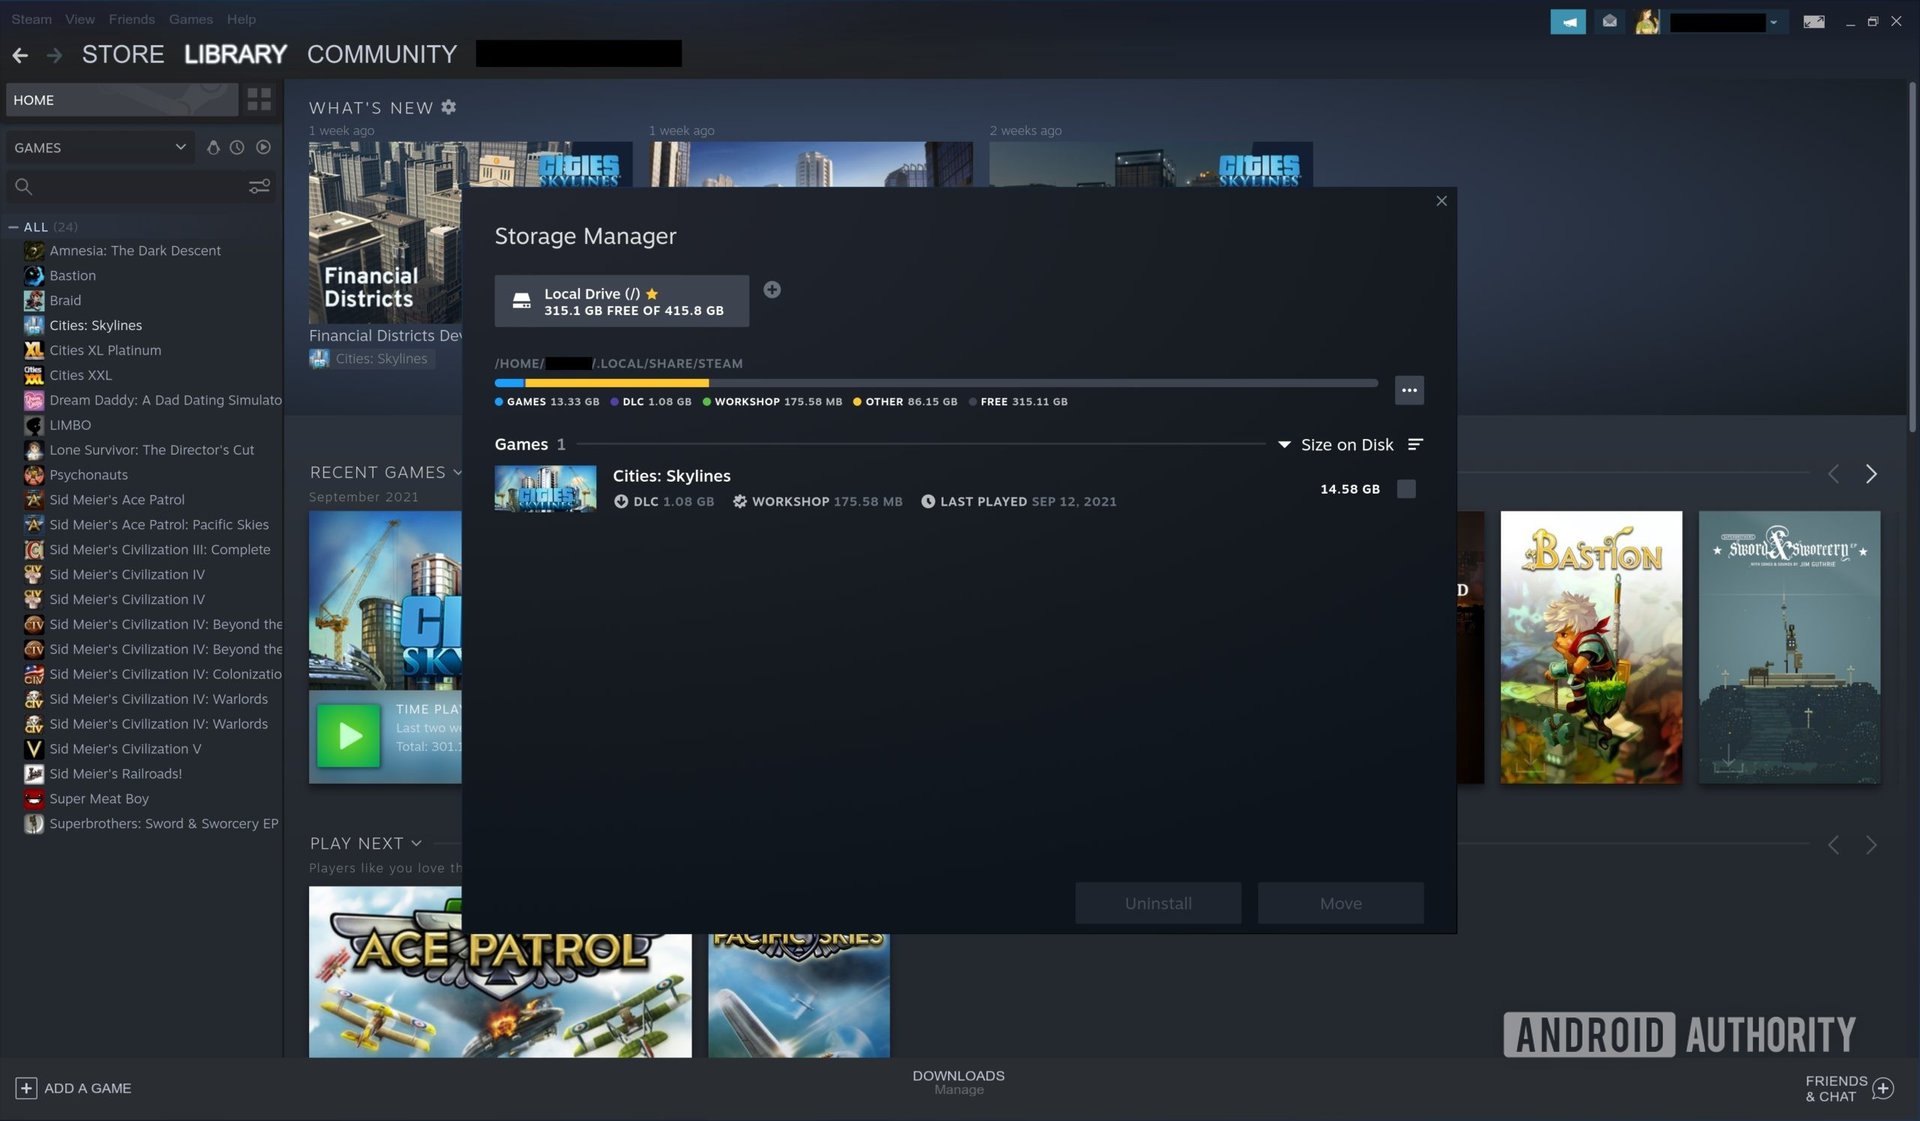 A screenshot of the Steam settings window showing the local drives.